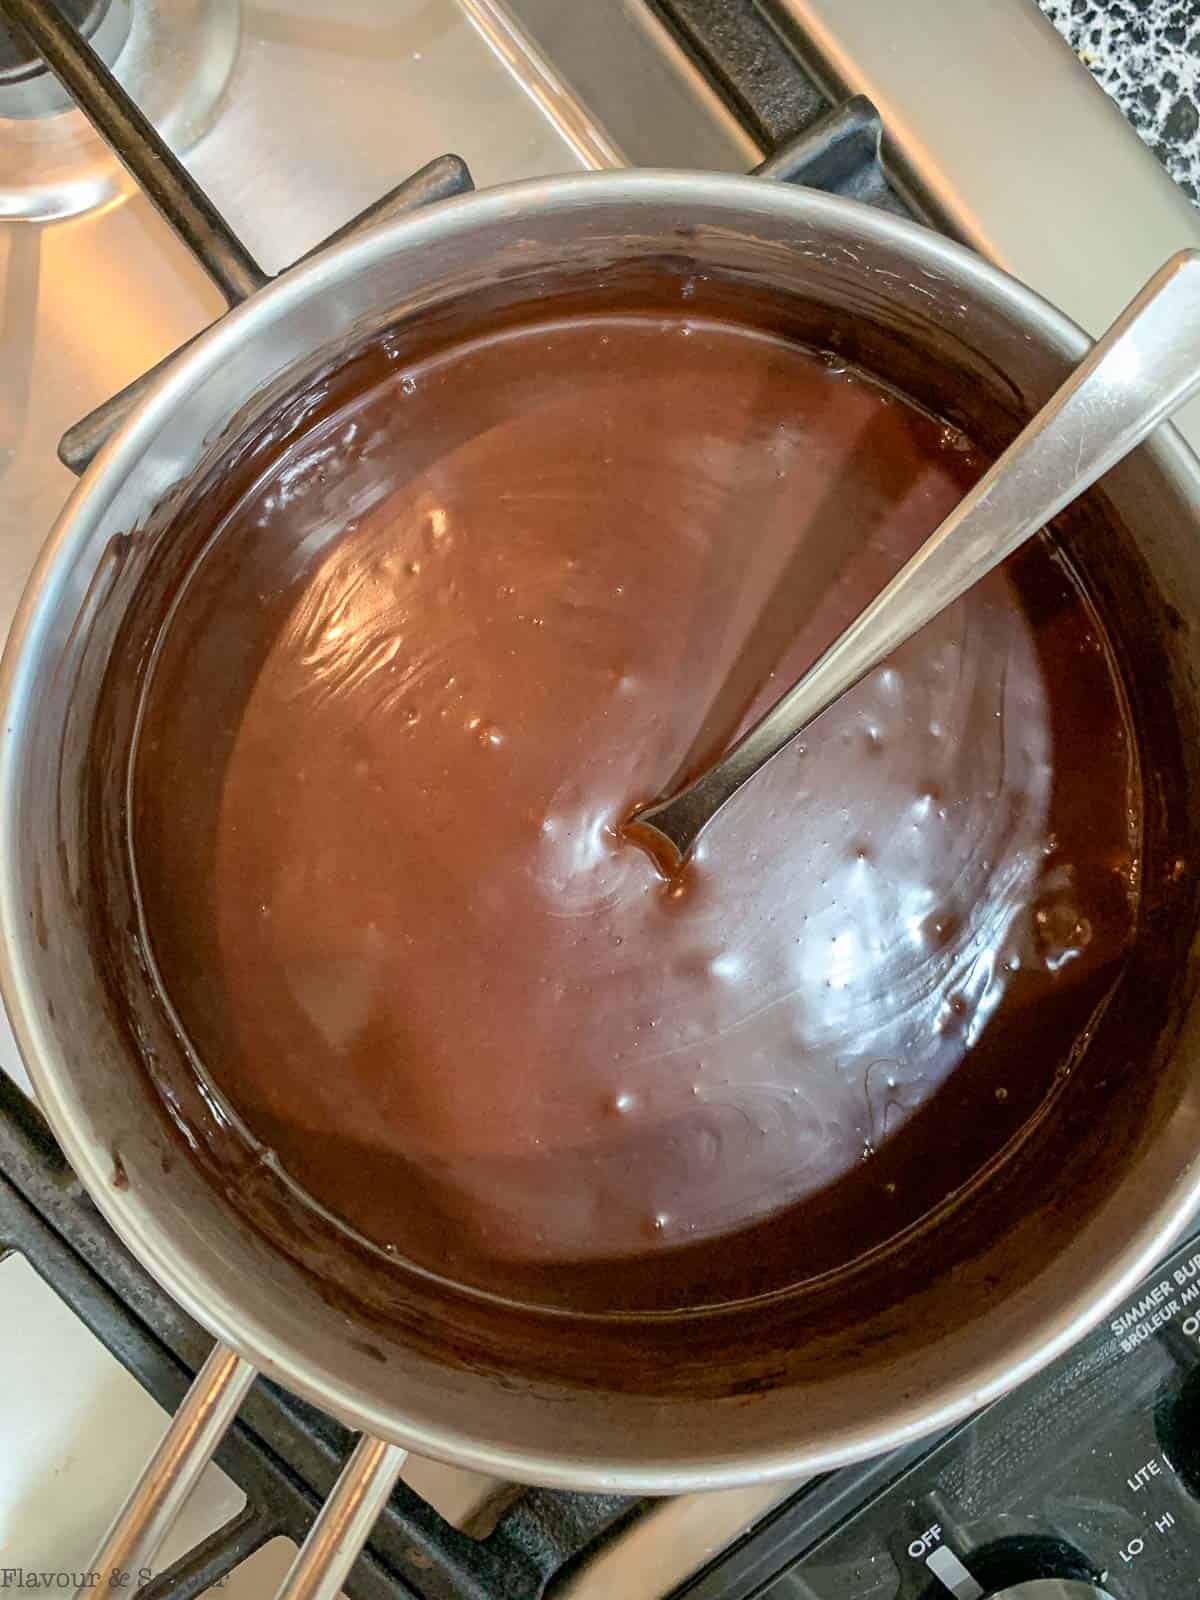 Heating oat milk pudding in a sauceapn.